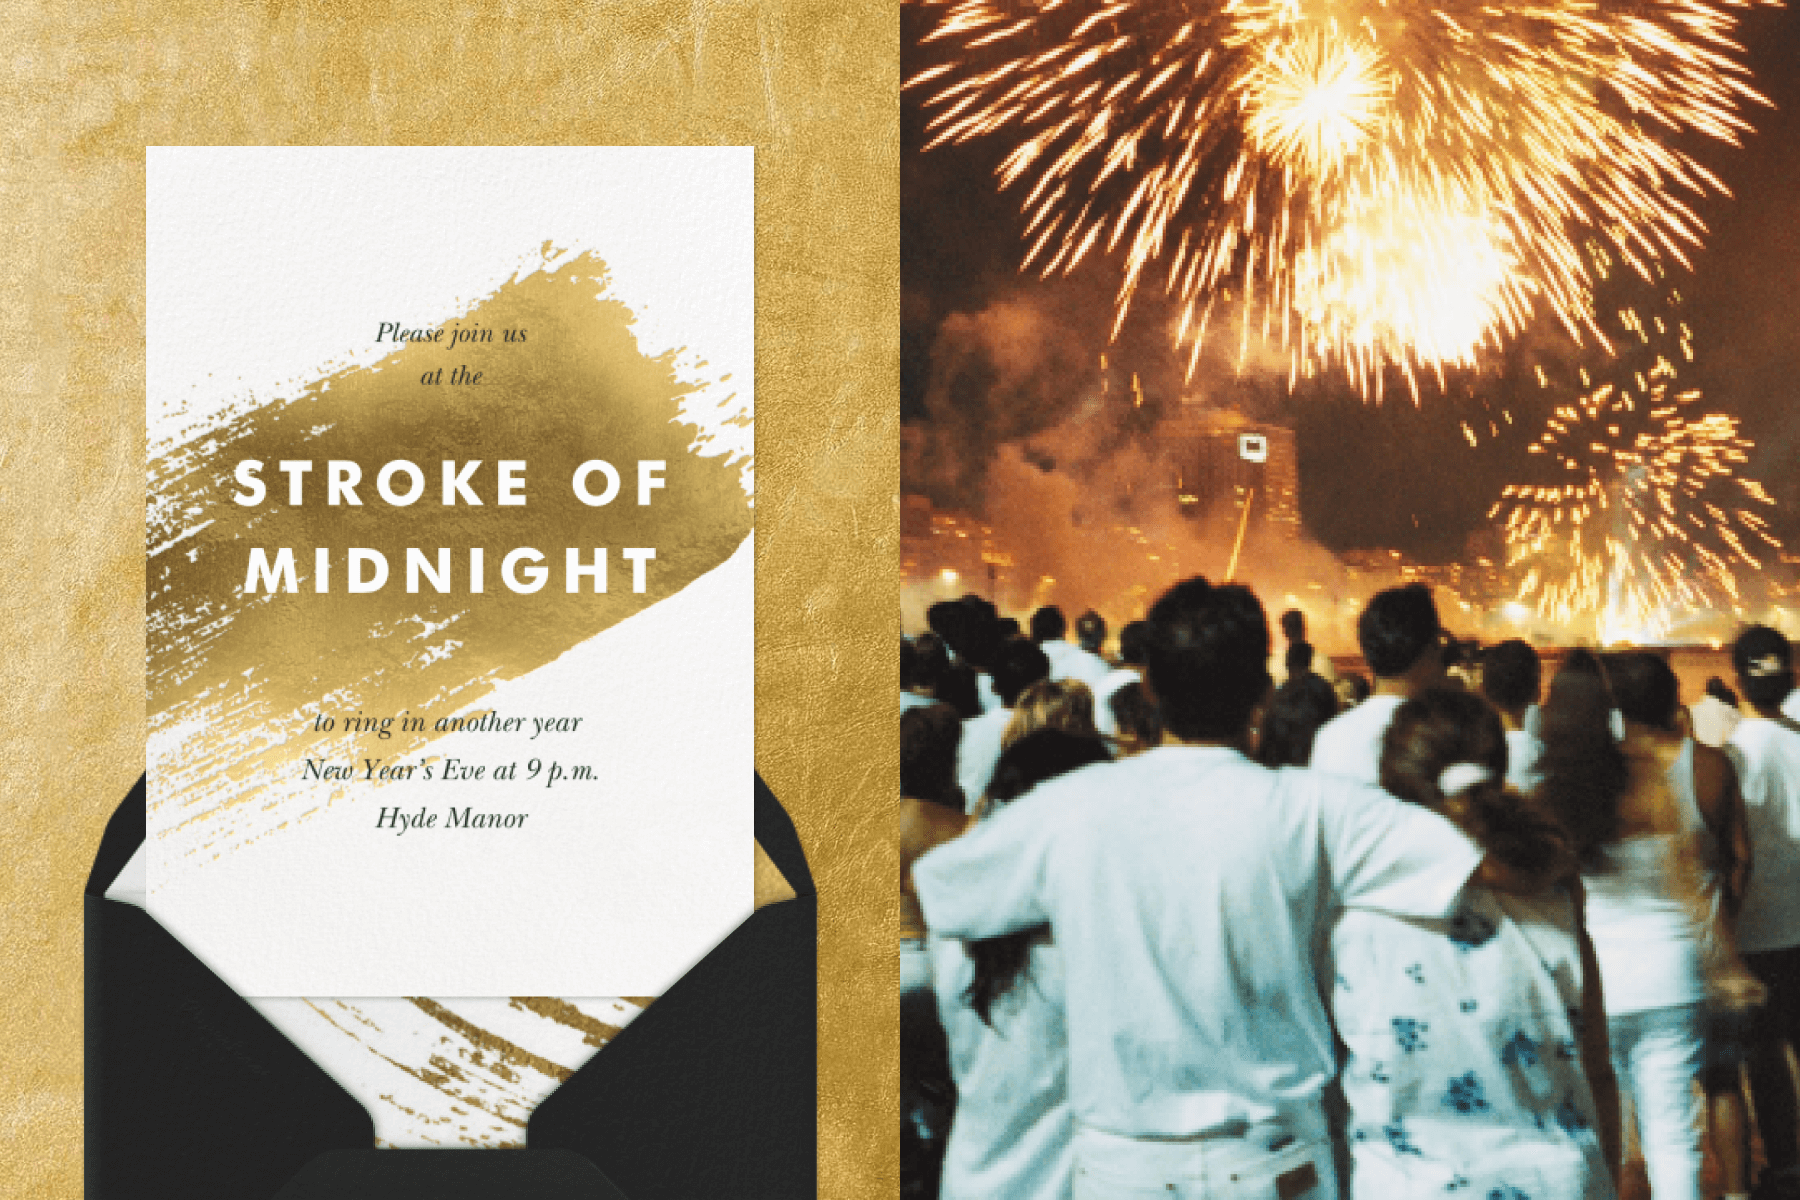 Left: A card with a gold brushstroke and the words “Stroke of midnight.” Right: A crowd of people wearing white beneath gold fireworks.